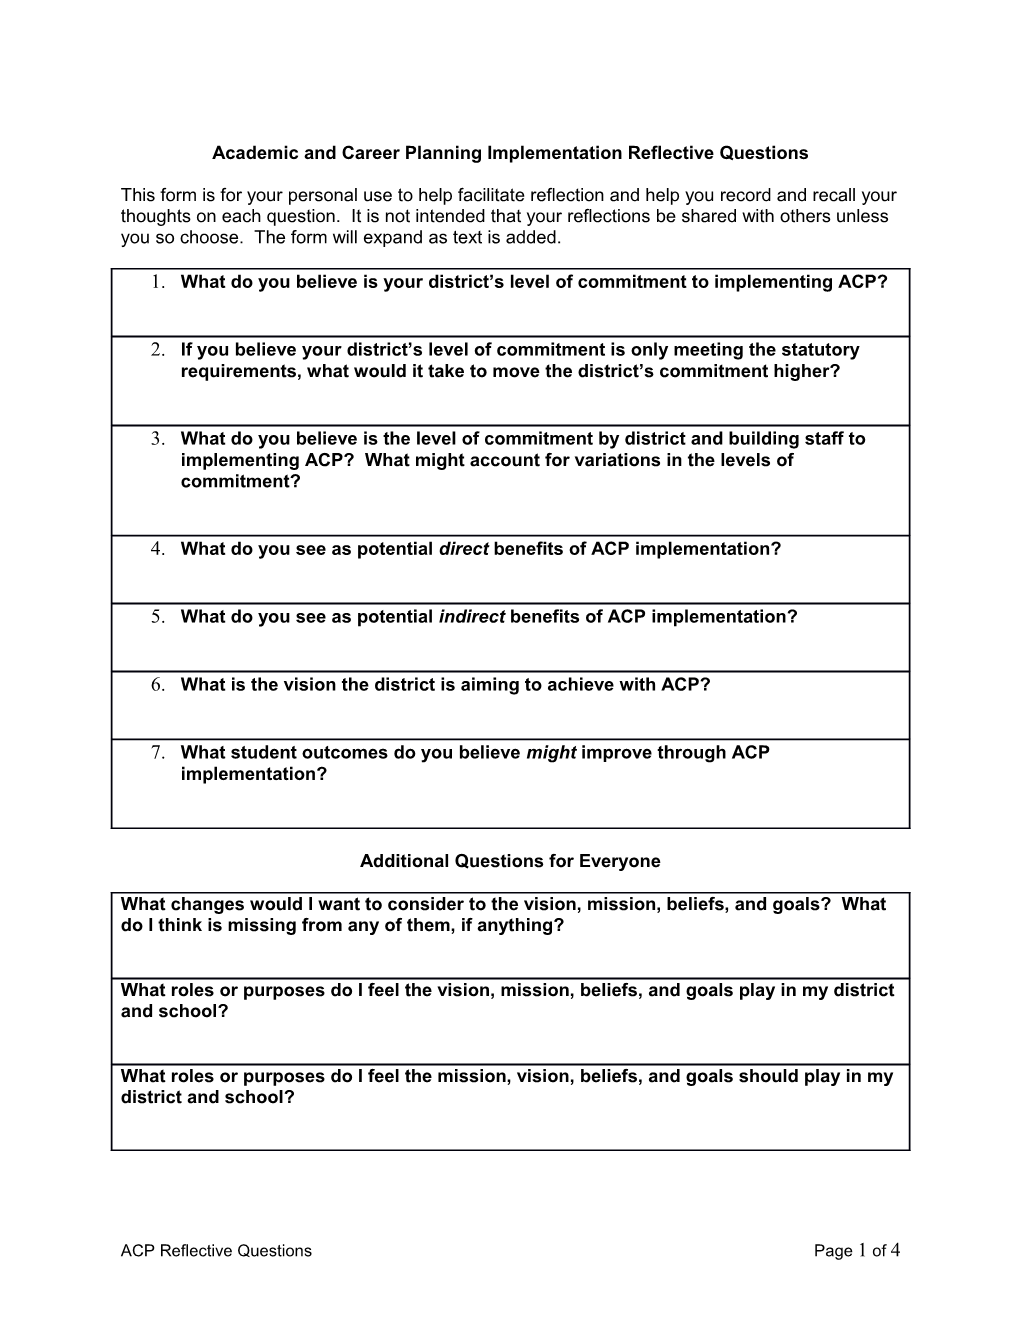 Academic and Career Planning Implementation Reflective Questions